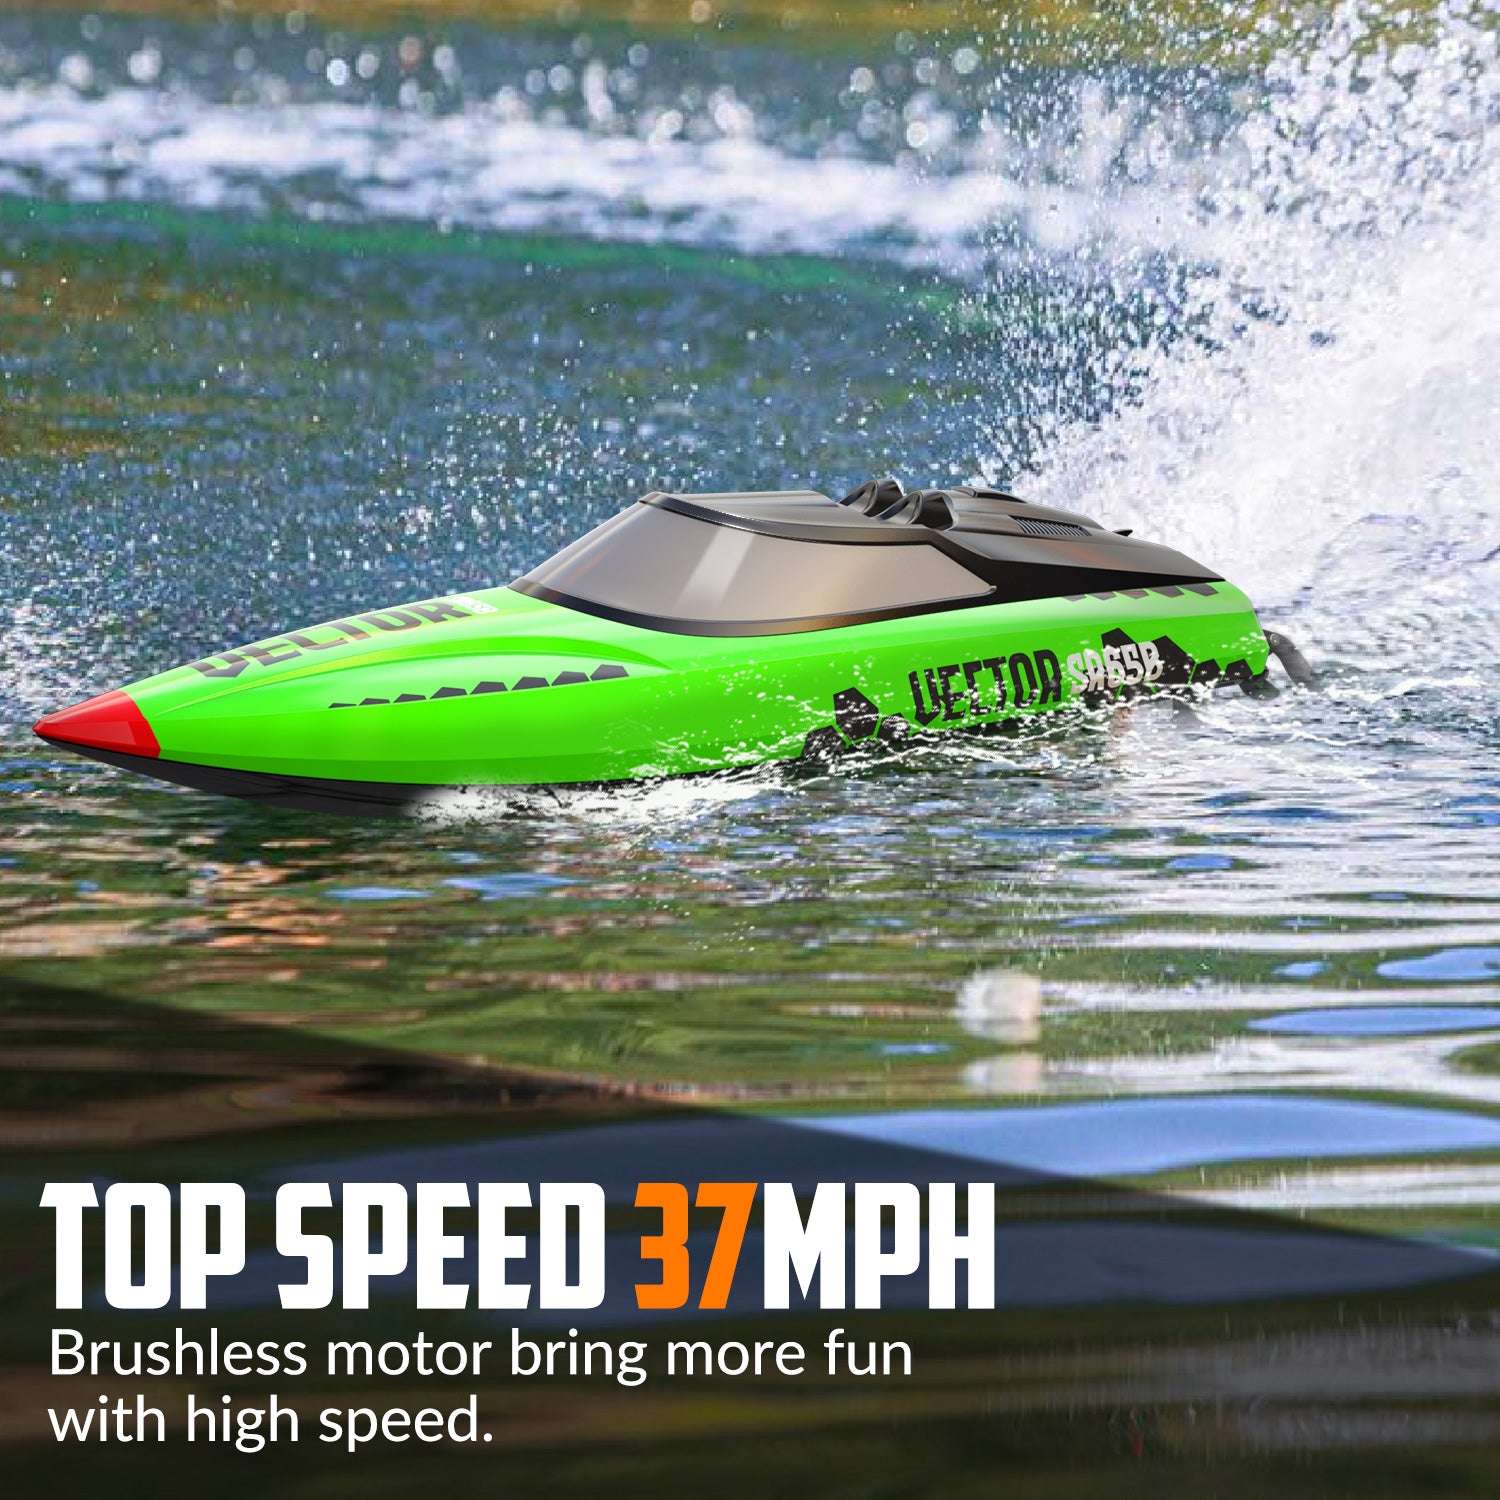 VectorSR65B High-Speed Brushless RC Boat 37MPH Self-righting Reverse RTR